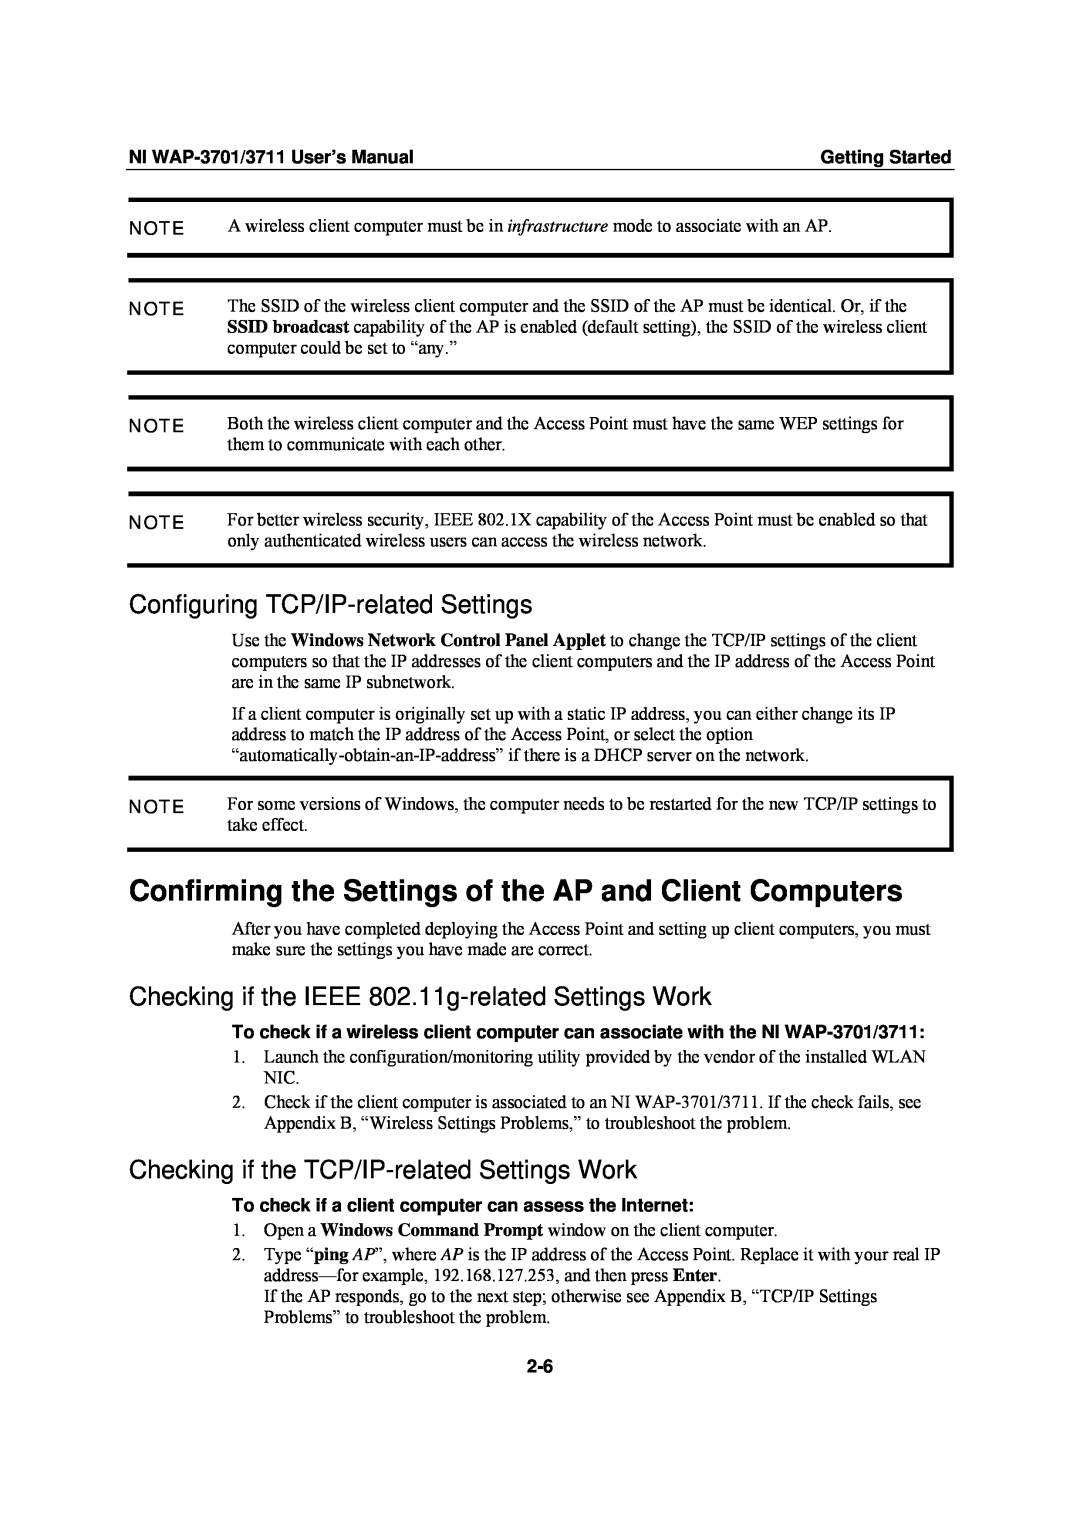 National Instruments WAP-3711 Confirming the Settings of the AP and Client Computers, Configuring TCP/IP-related Settings 